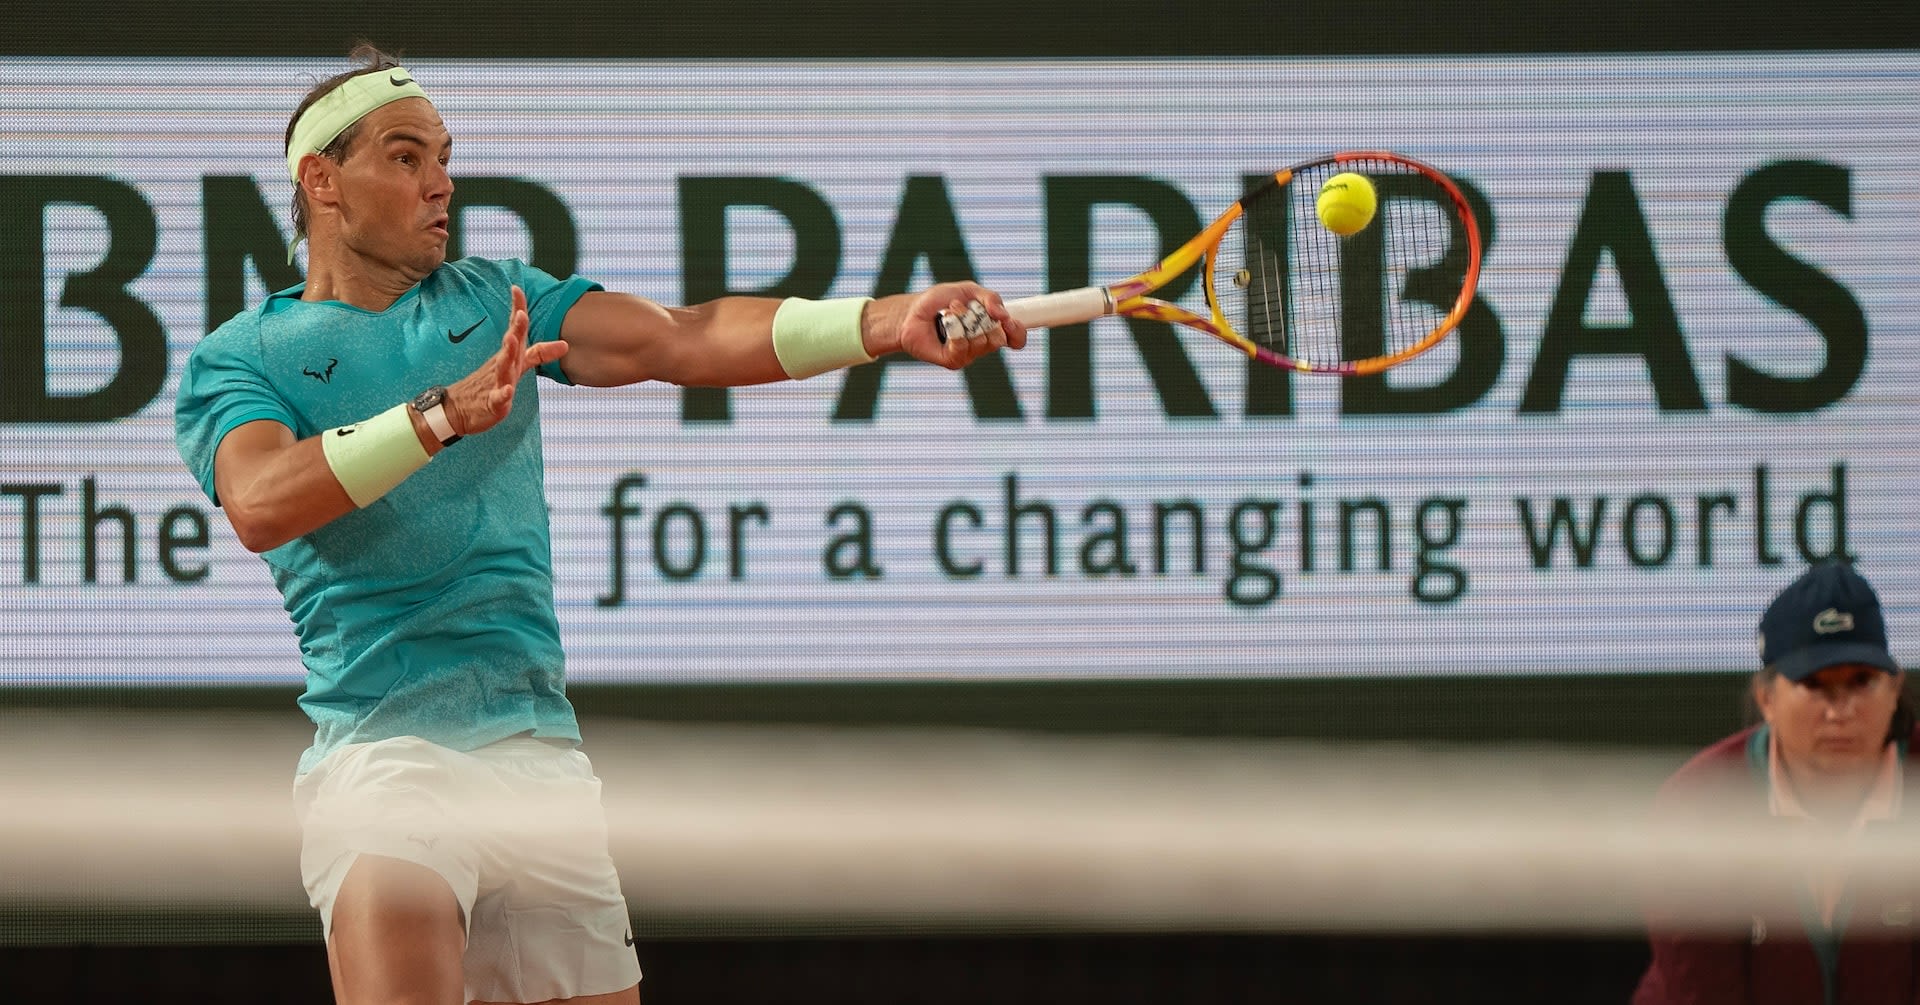 Nadal says Olympics main goal after early Roland Garros defeat